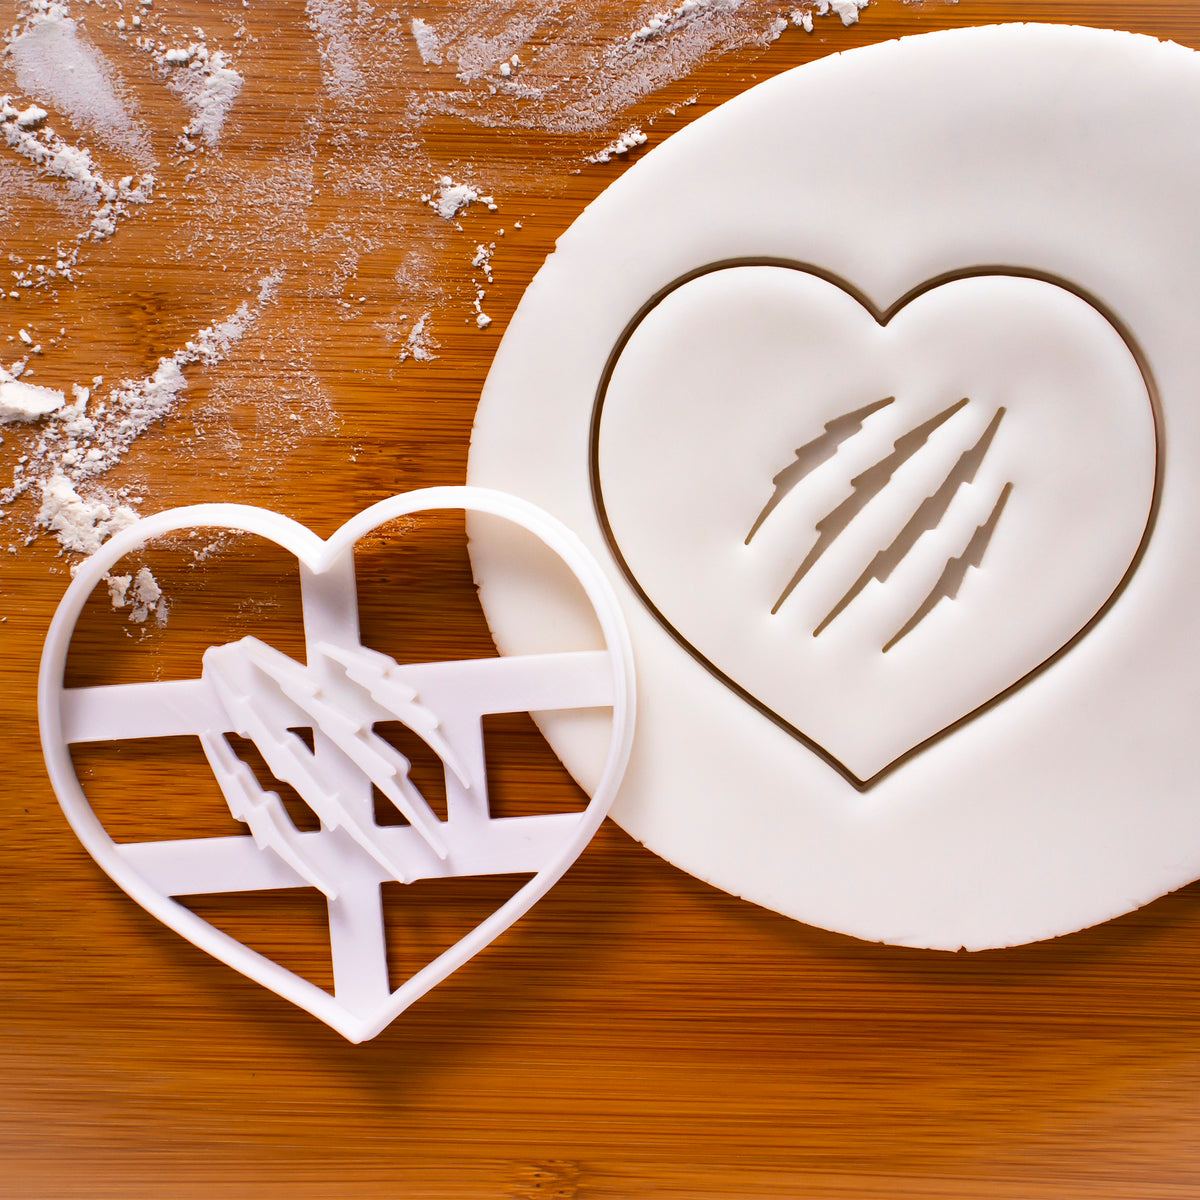 10 Best Heart Shaped Cookie Cutters for 2023 - The Jerusalem Post